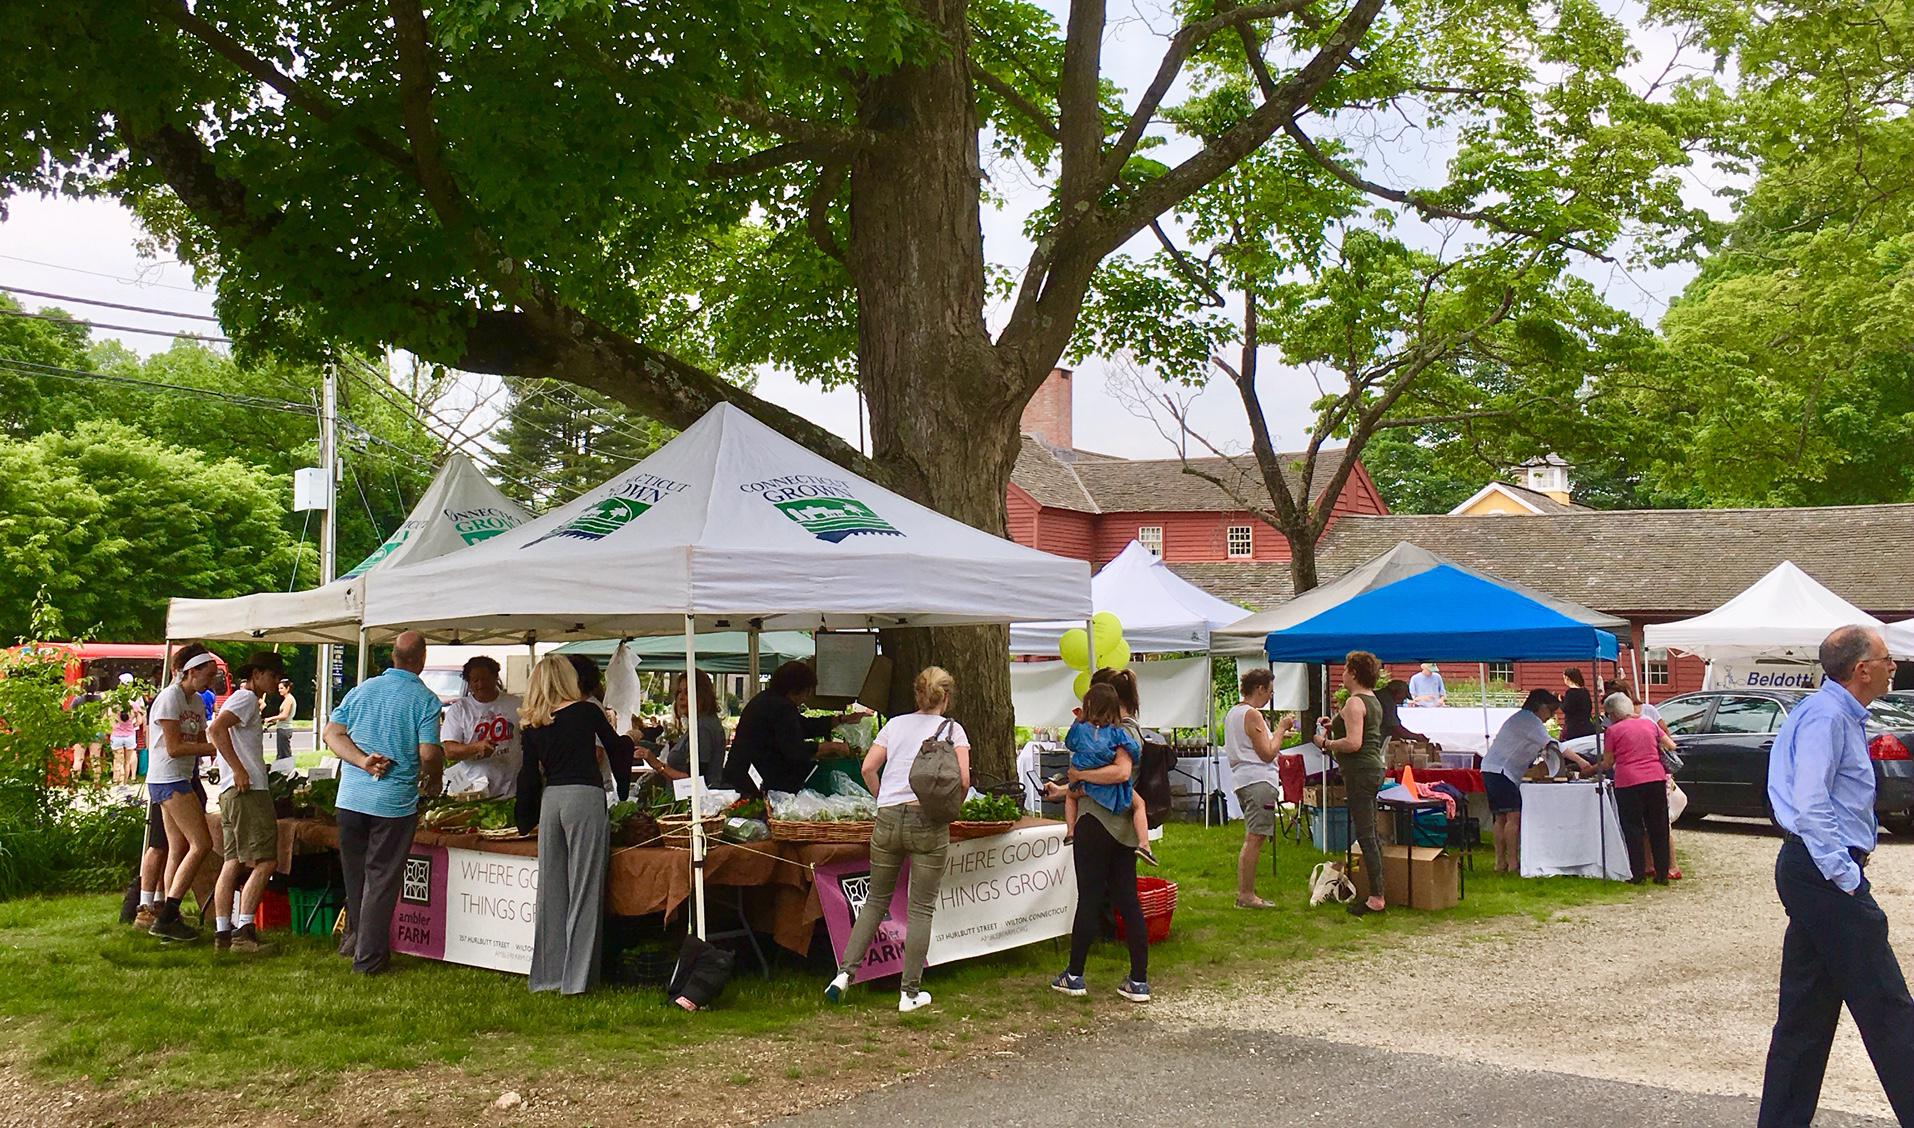 Wilton farmers market expects to open